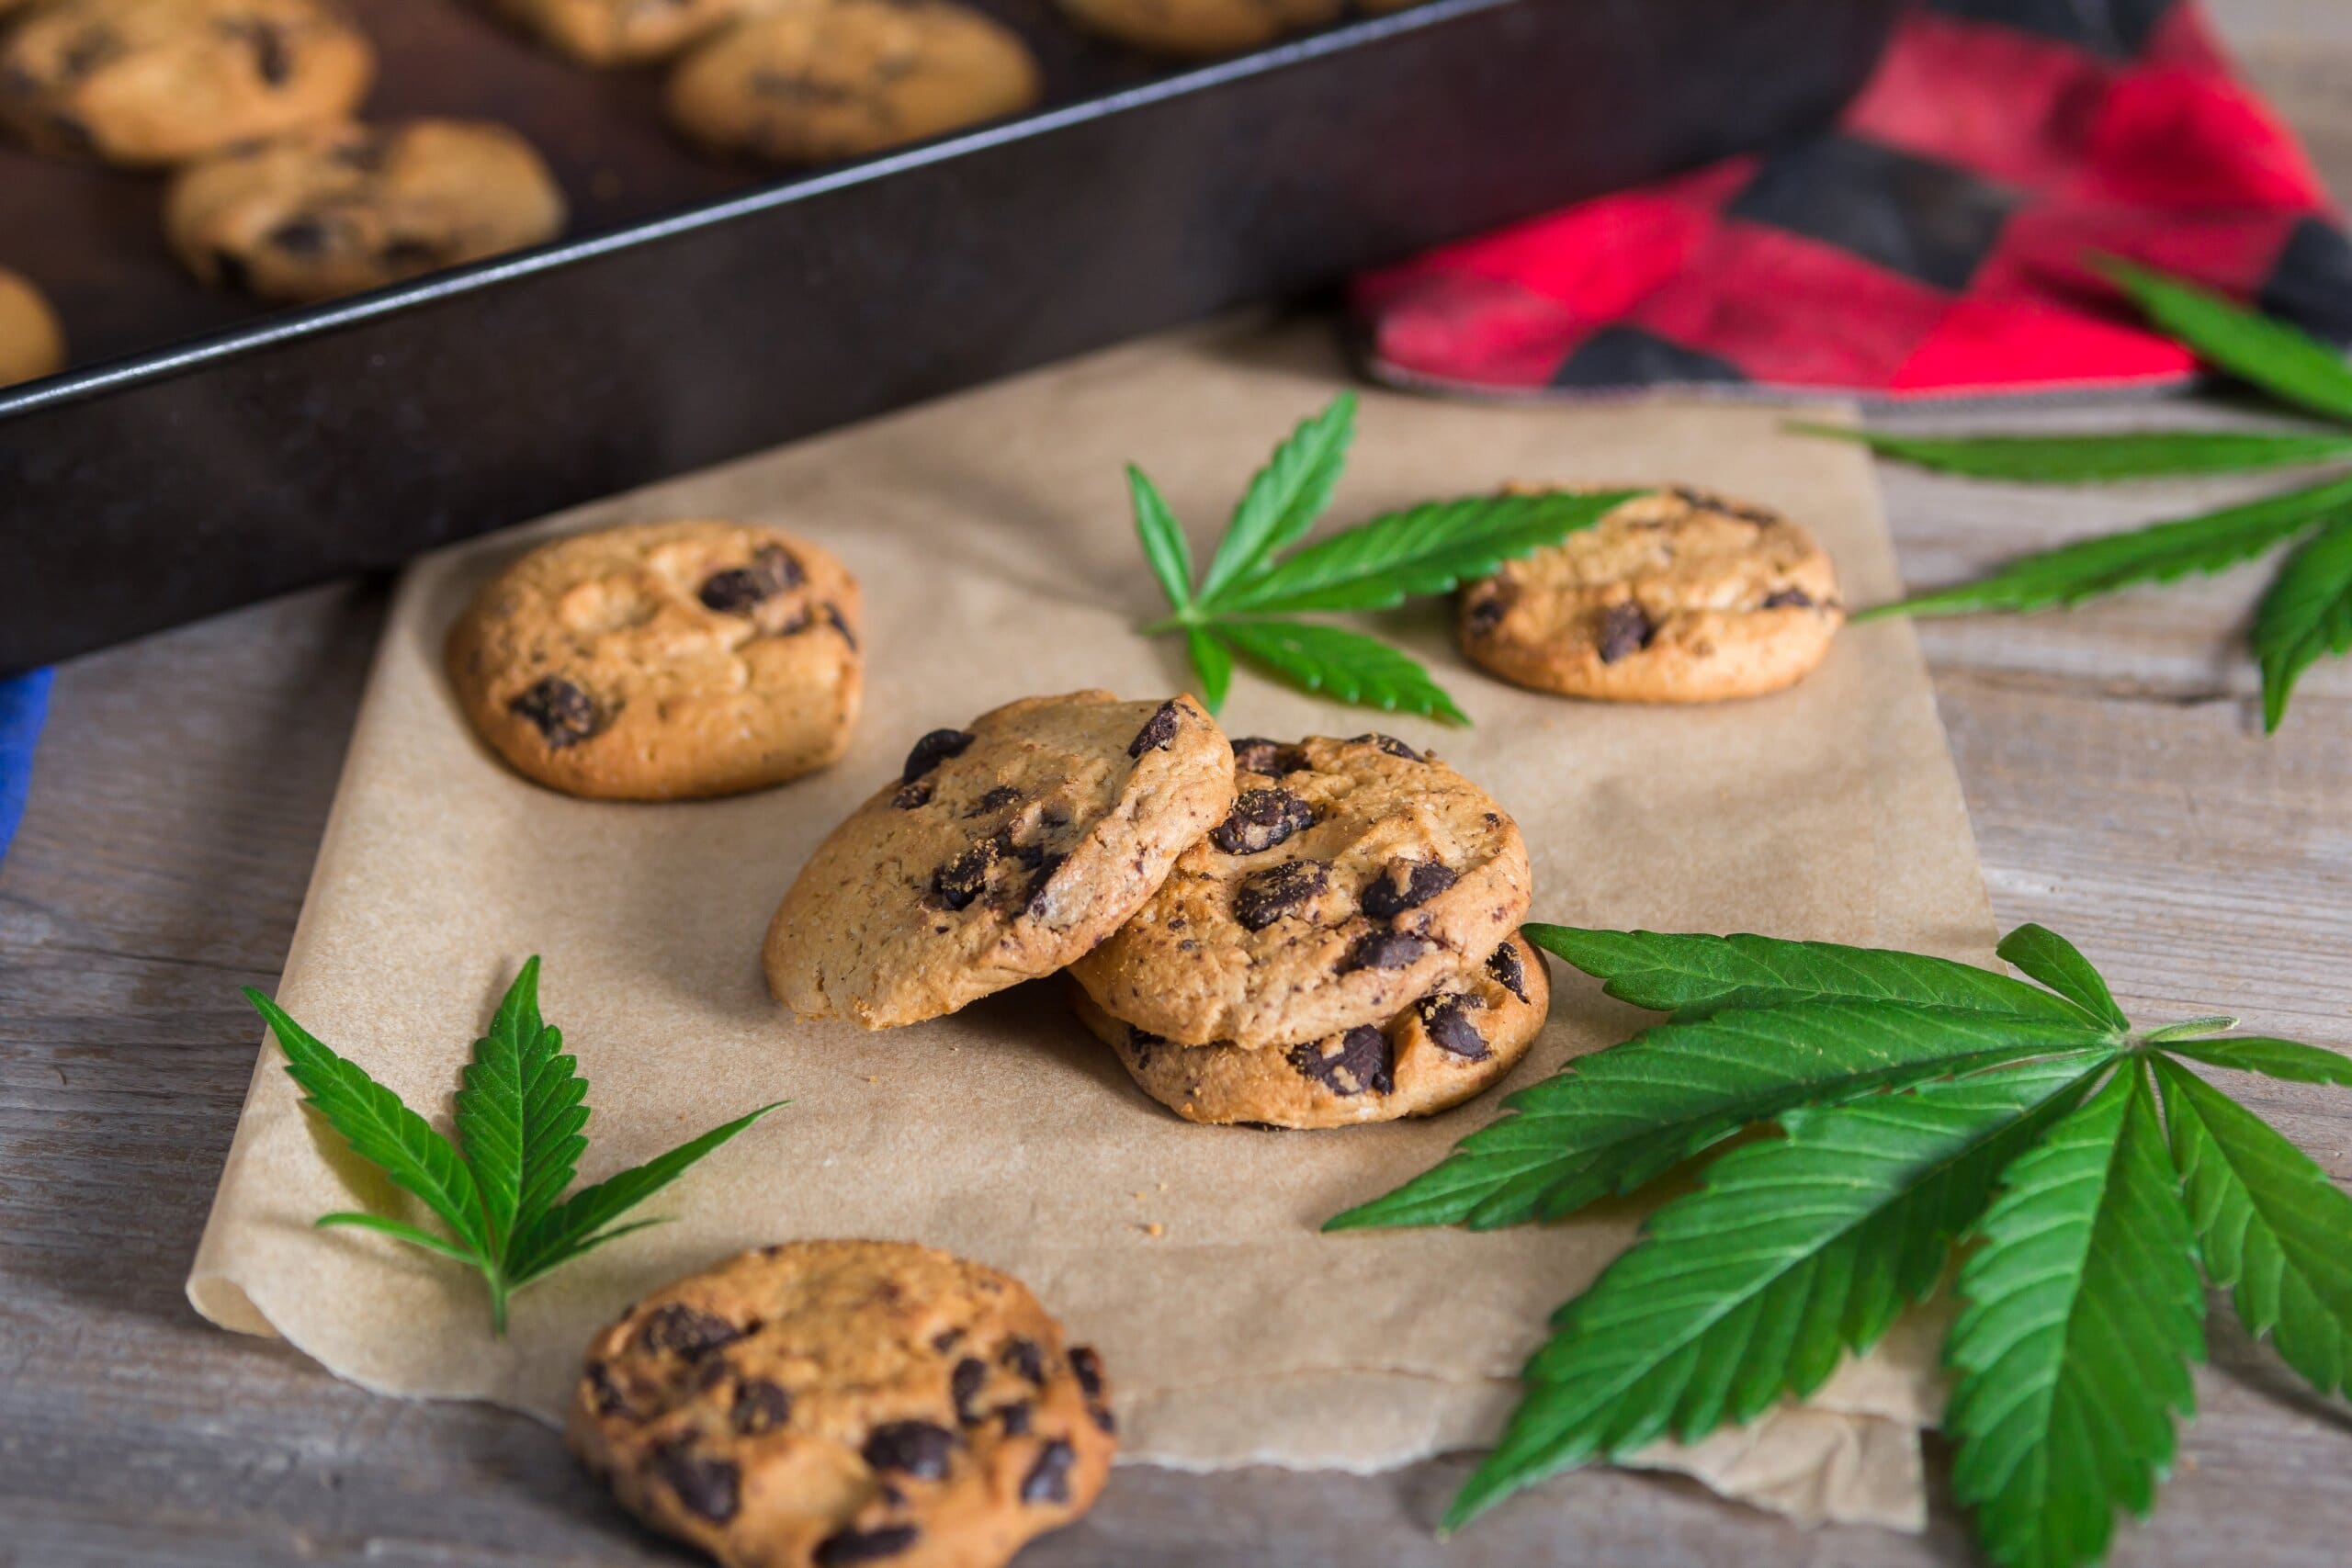 Freshly baked cannabis butter cookies with hemp leaves scattered across.